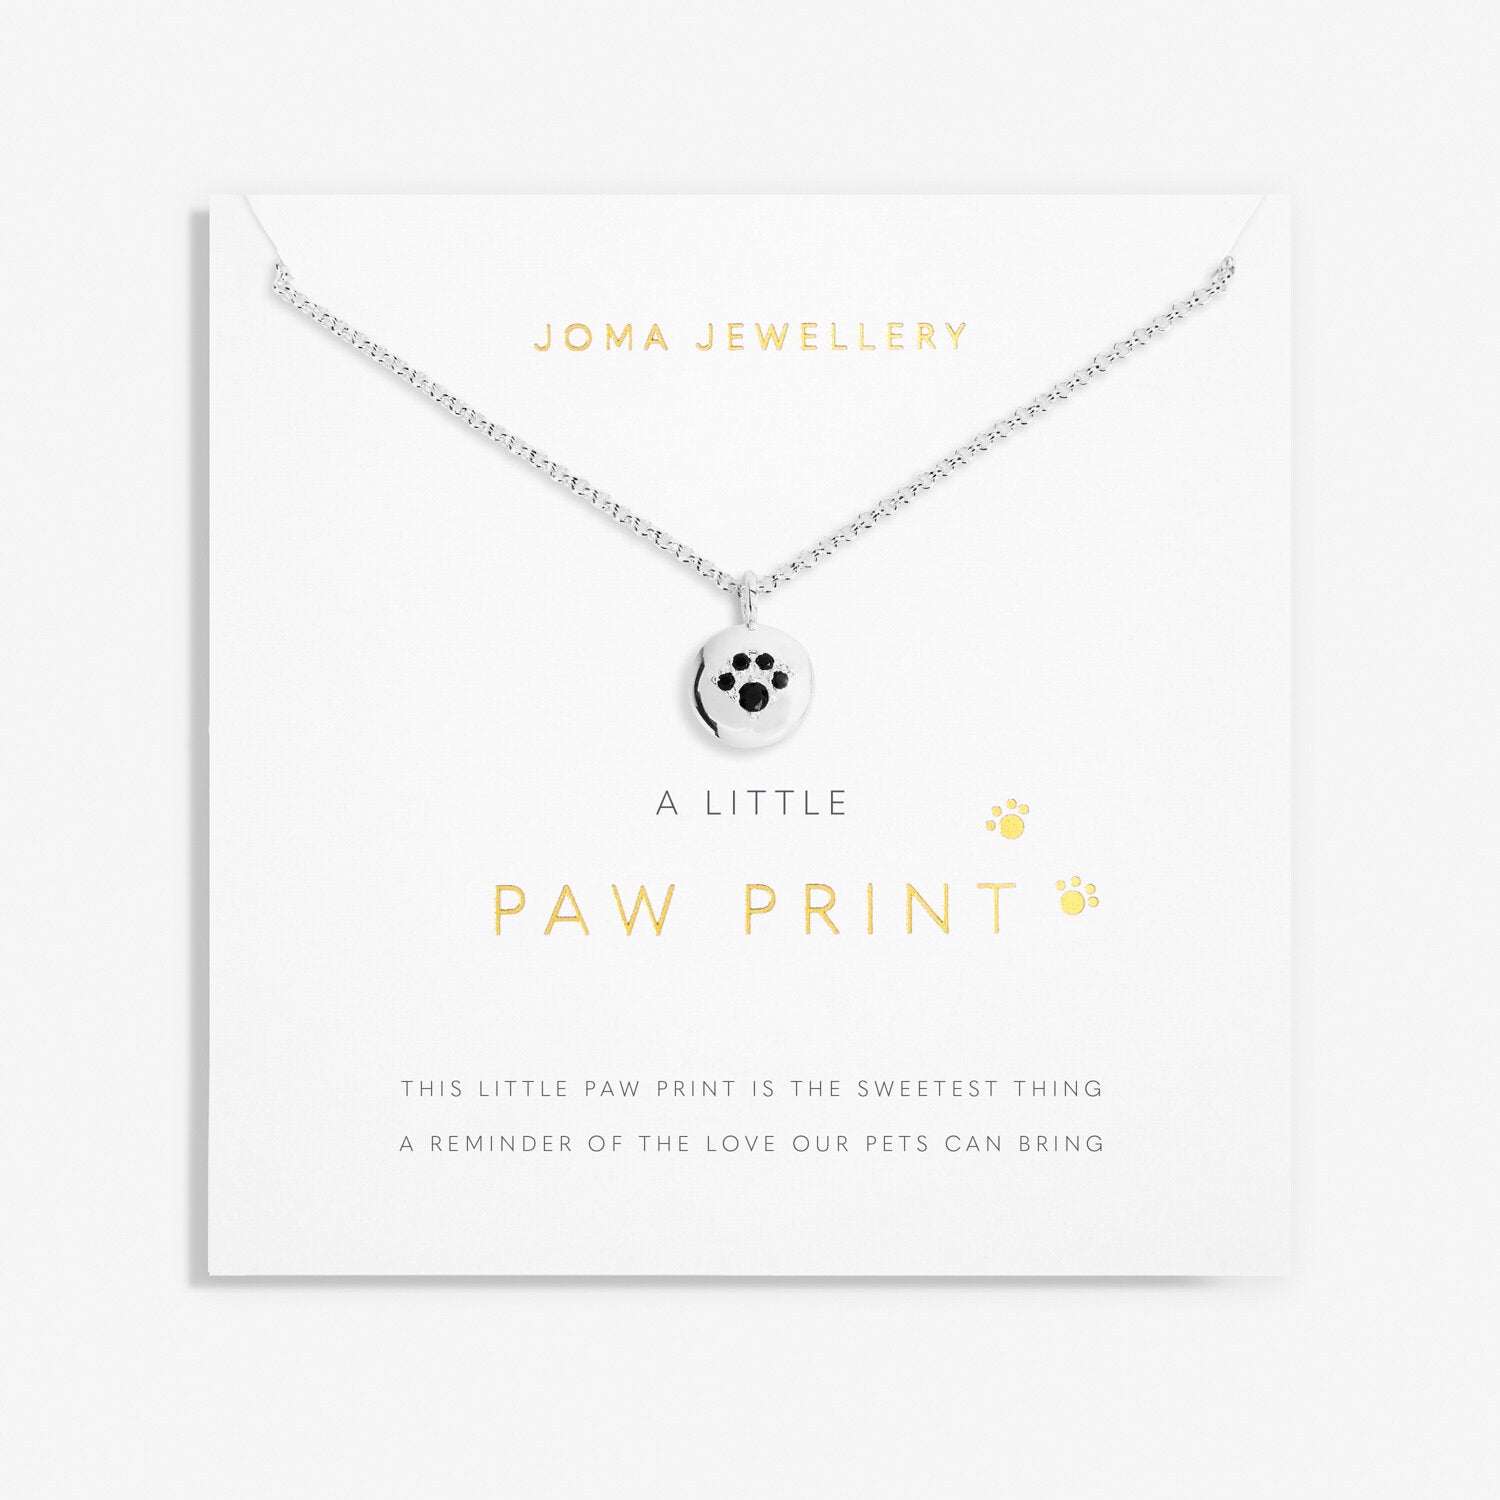 A Little - Paw Print Necklace - Joma Jewellery